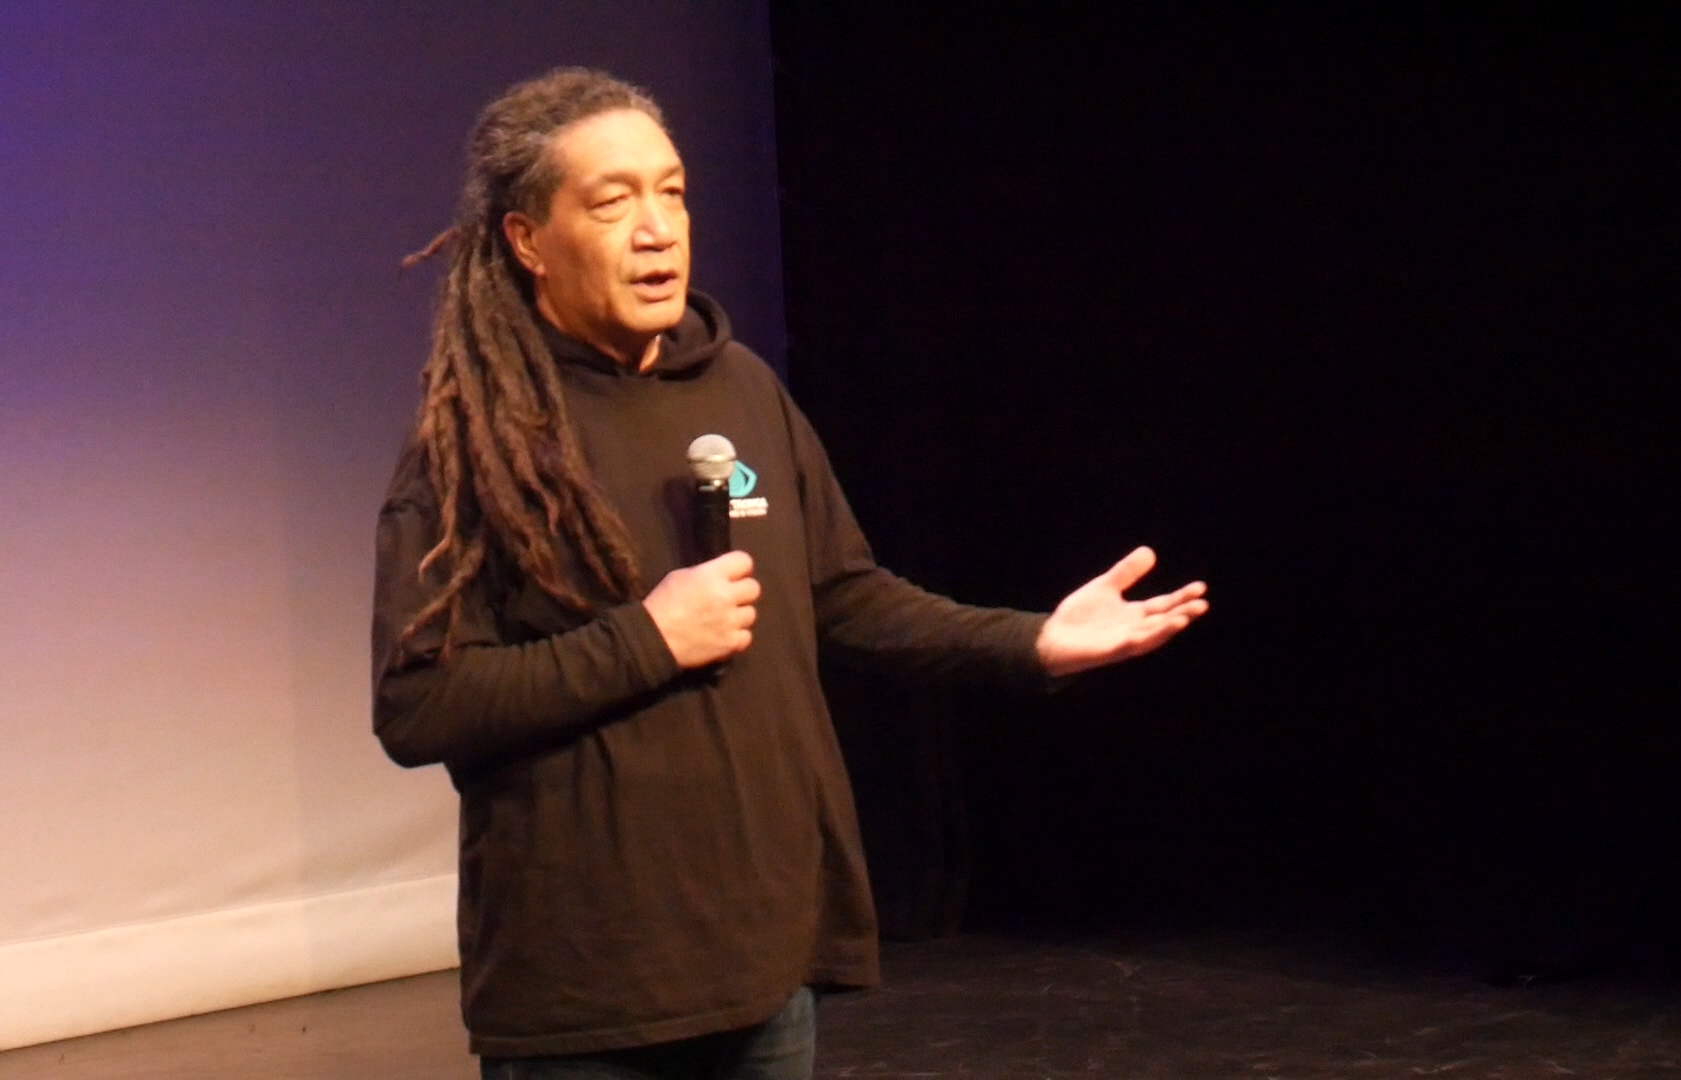 Slider Image Lawrence Wharerau from Ngā Taonga Sound & Vision introducing the special Ngā Taonga double feature of Bastion Point: Day 507 and Te Matakite o Aotearoa - The Māori Land March.